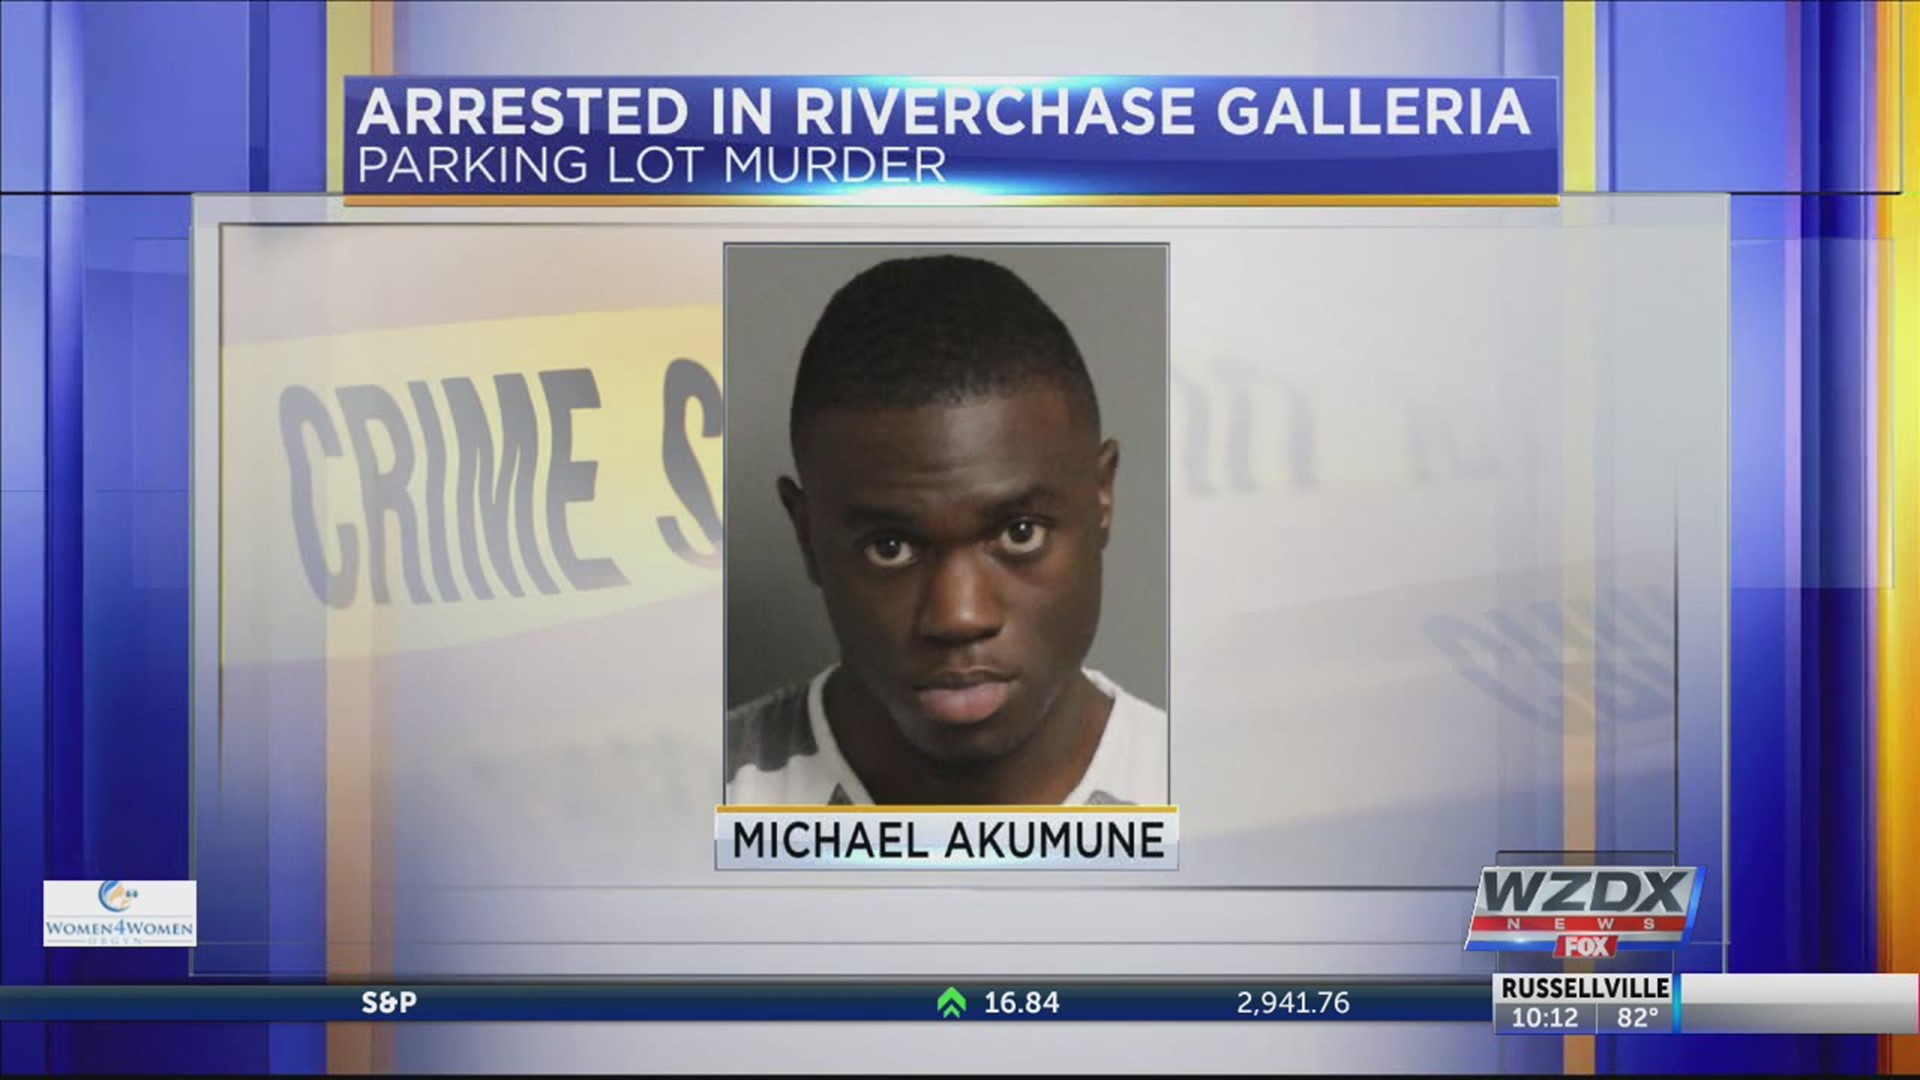 Hoover police have mad an arrest in the murder at a parking lot at the Riverchase Galleria.